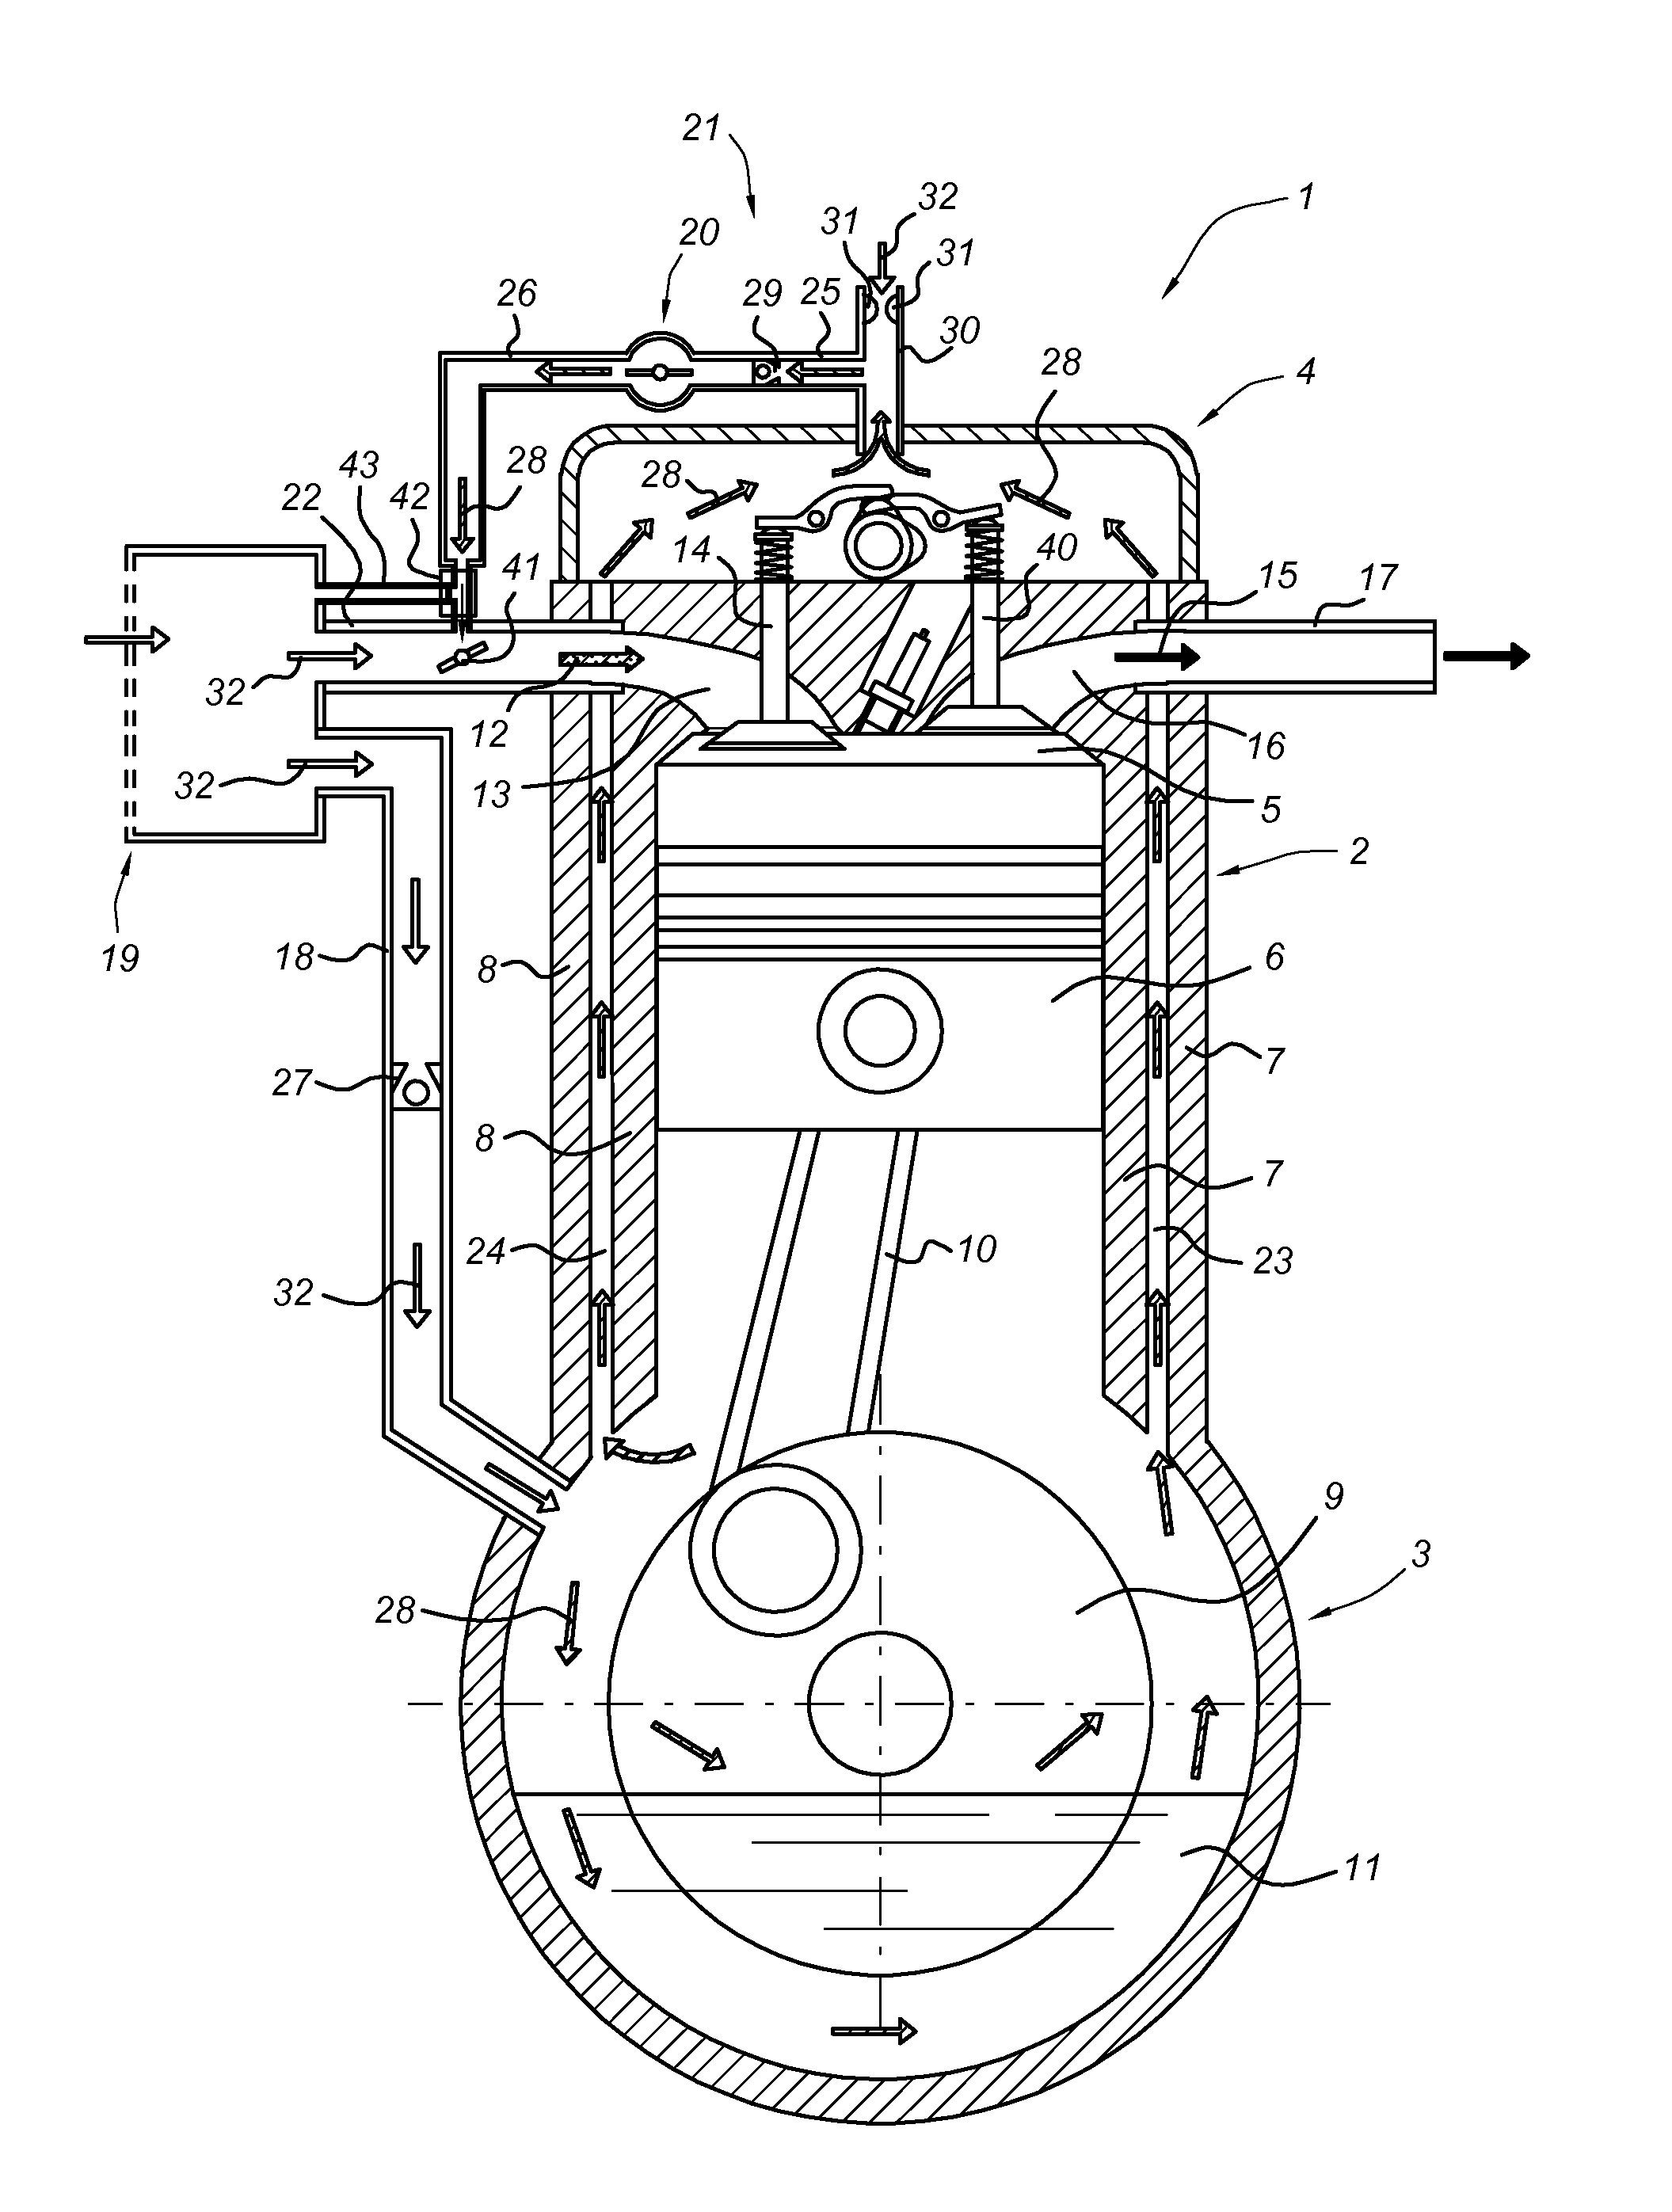 Assembly for use in a crankcase ventilation system, a crankcase ventilation system comprising such an assembly, and a method for installing such an assembly